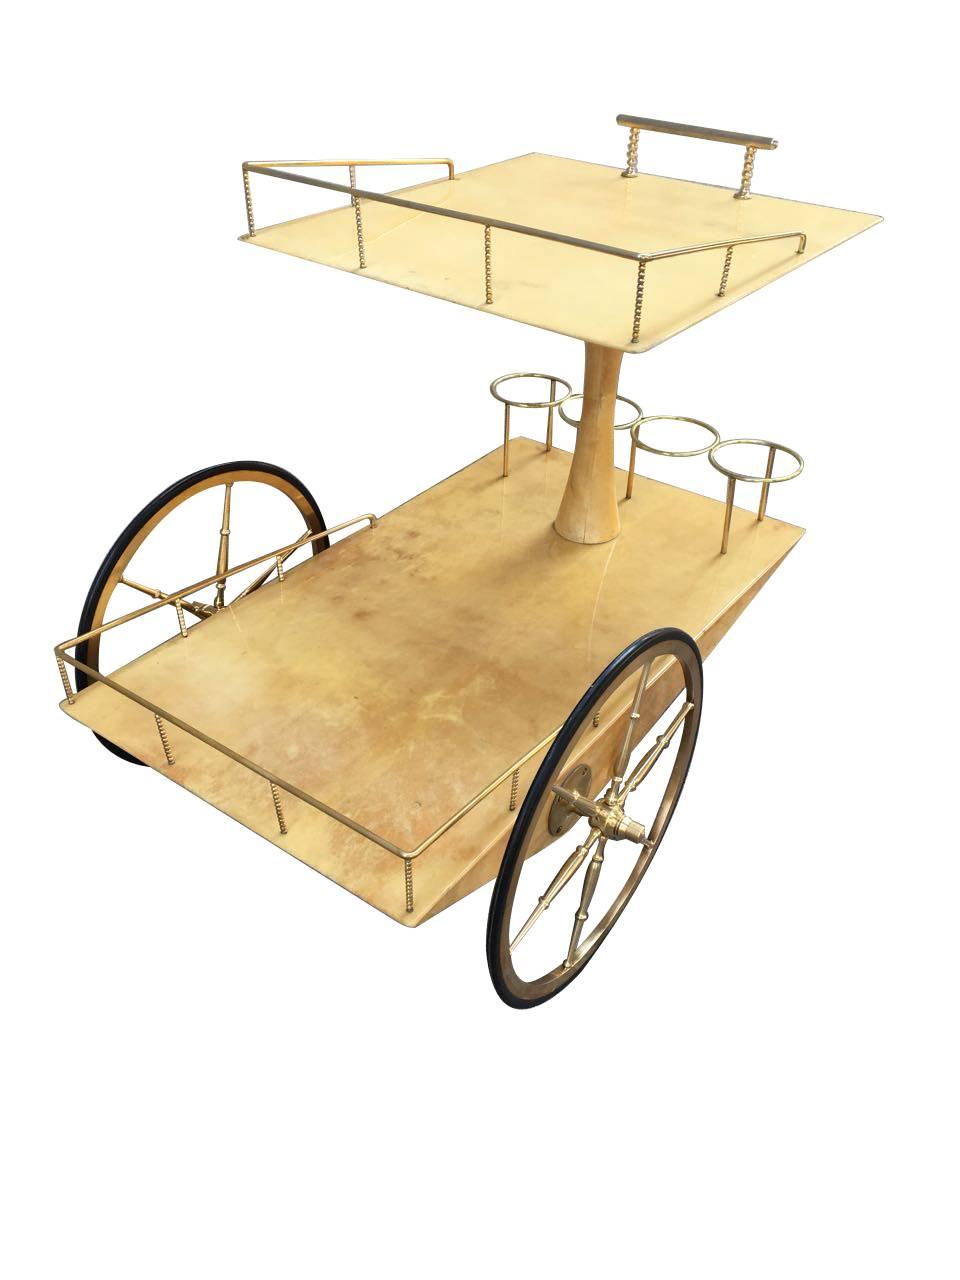 Rare Aldo Tura parchment goatskin bar cart, with a gorgeous brass structure, and bottle holders.
The Italian designer Aldo Tura established his furniture production workshop in 1939. During the postwar period, while the other Italian designers